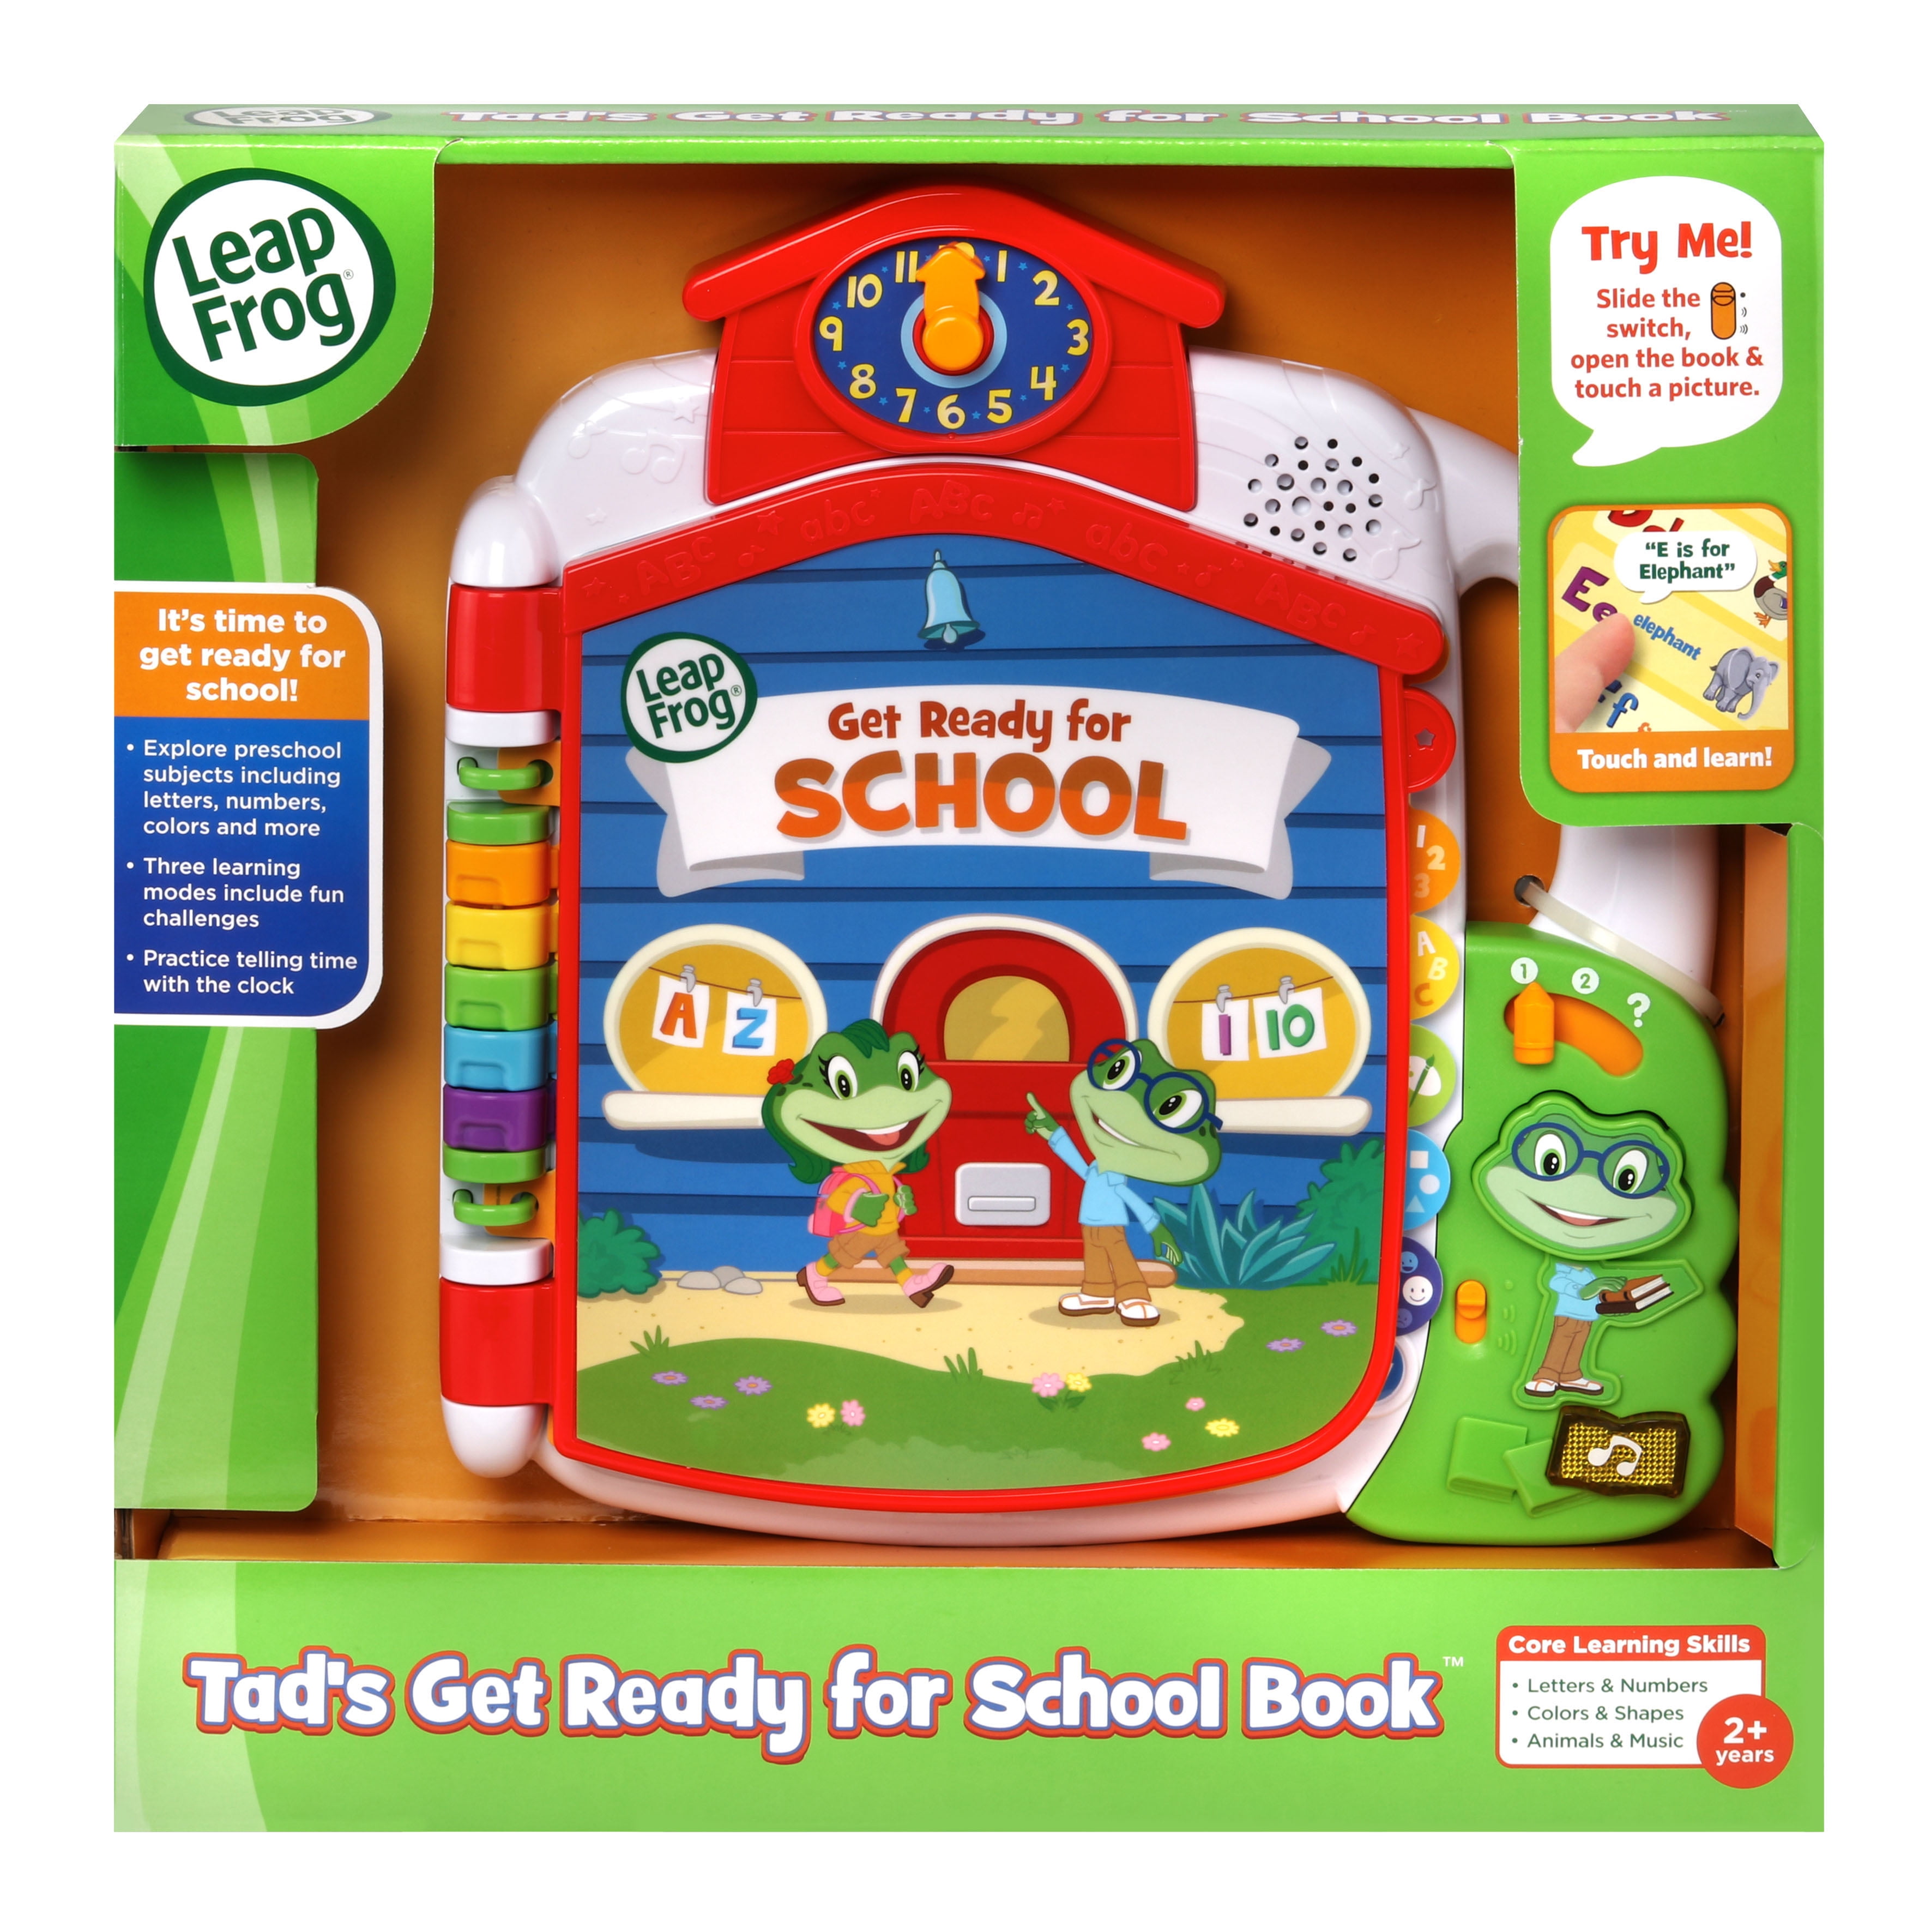 2236 for sale online LeapFrog Tad's Get Ready for School Book Leap Frog Learning Read 